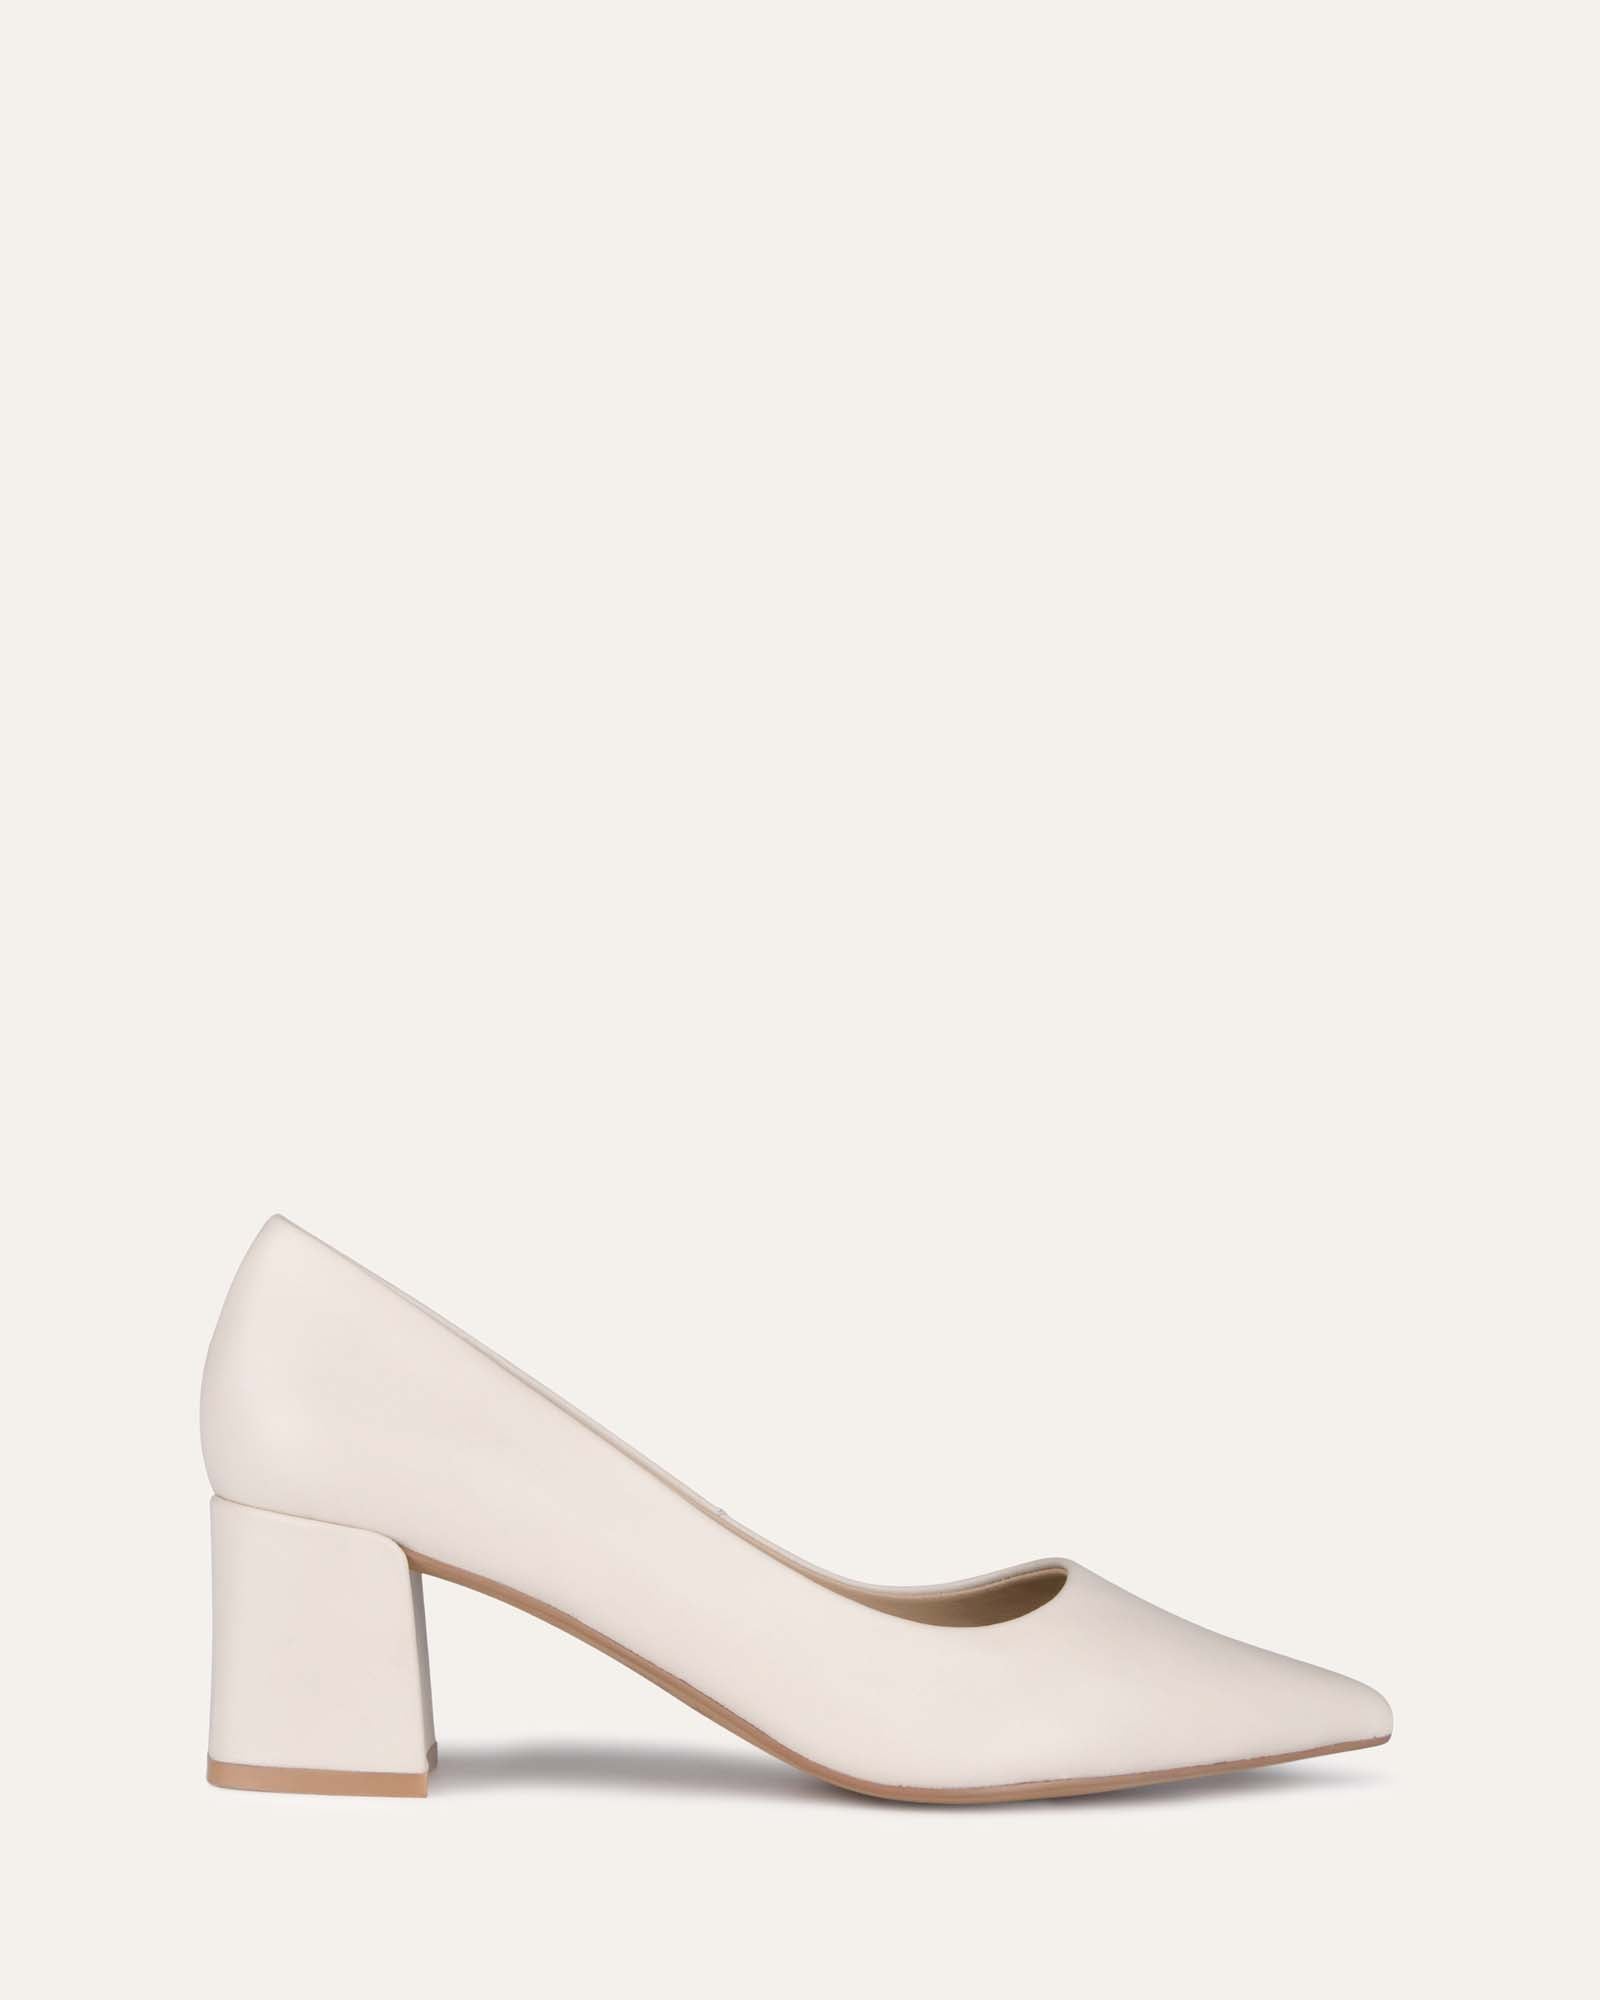 Off-White Pumps - Women's 38 | Fashionably Yours